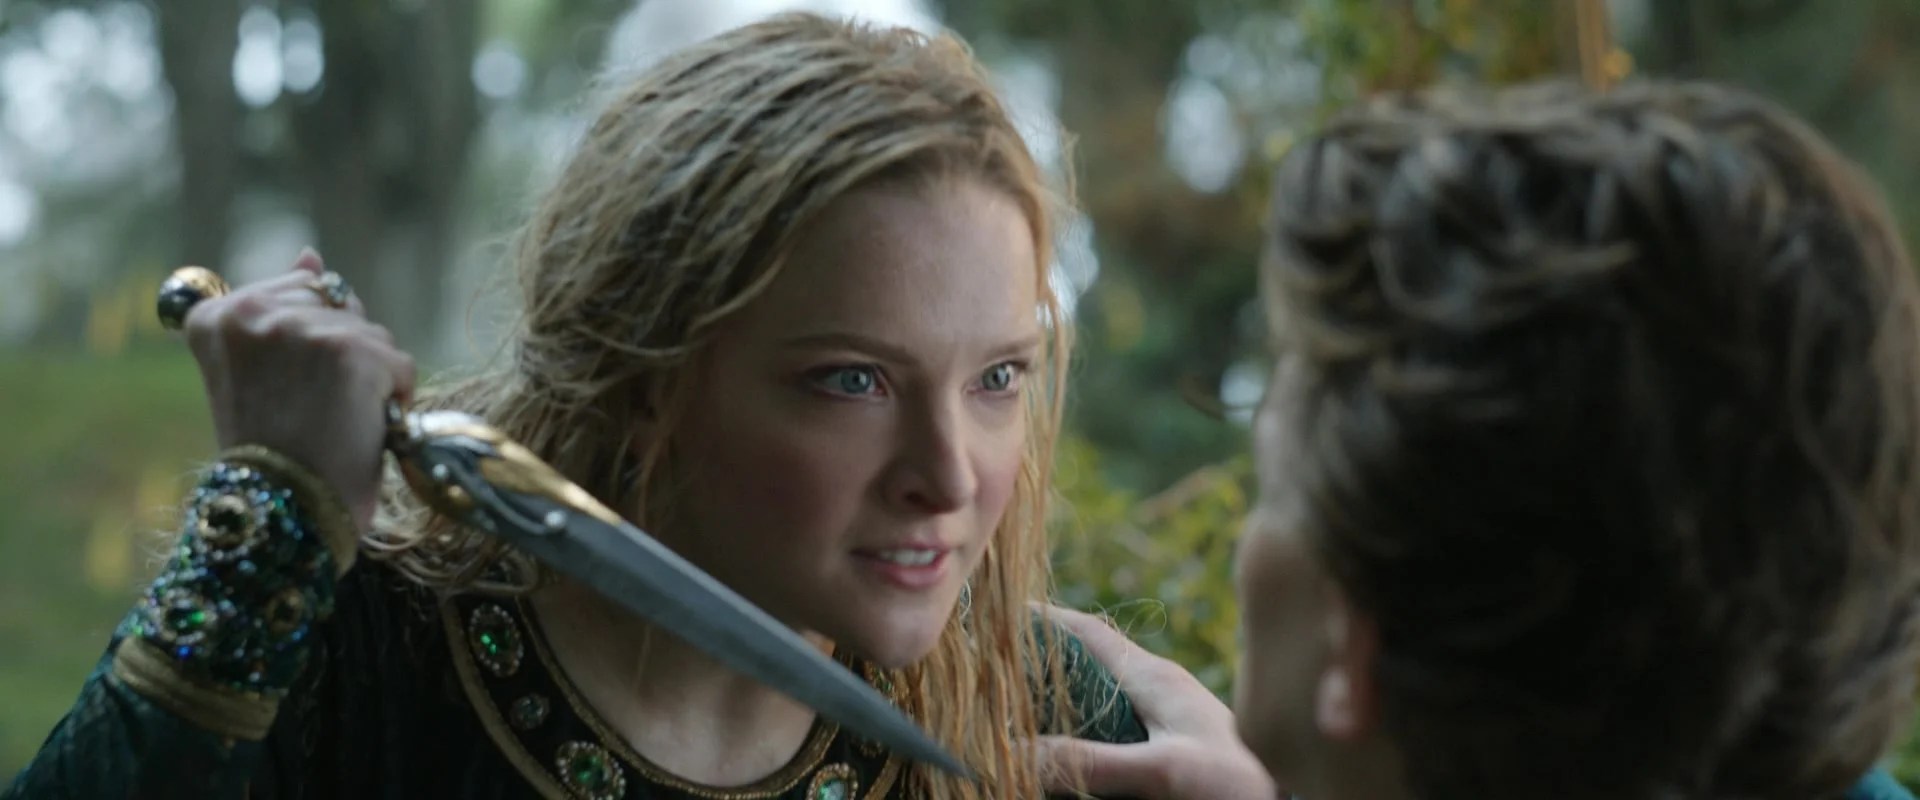 A startled Galadriel (Morfydd Clark) draws her blade on Elrond (Robert Aramayo) in The Lord of the Rings: The Rings of Power Season 1 Episode 8 "Alloyed" (2022), Amazon Studios